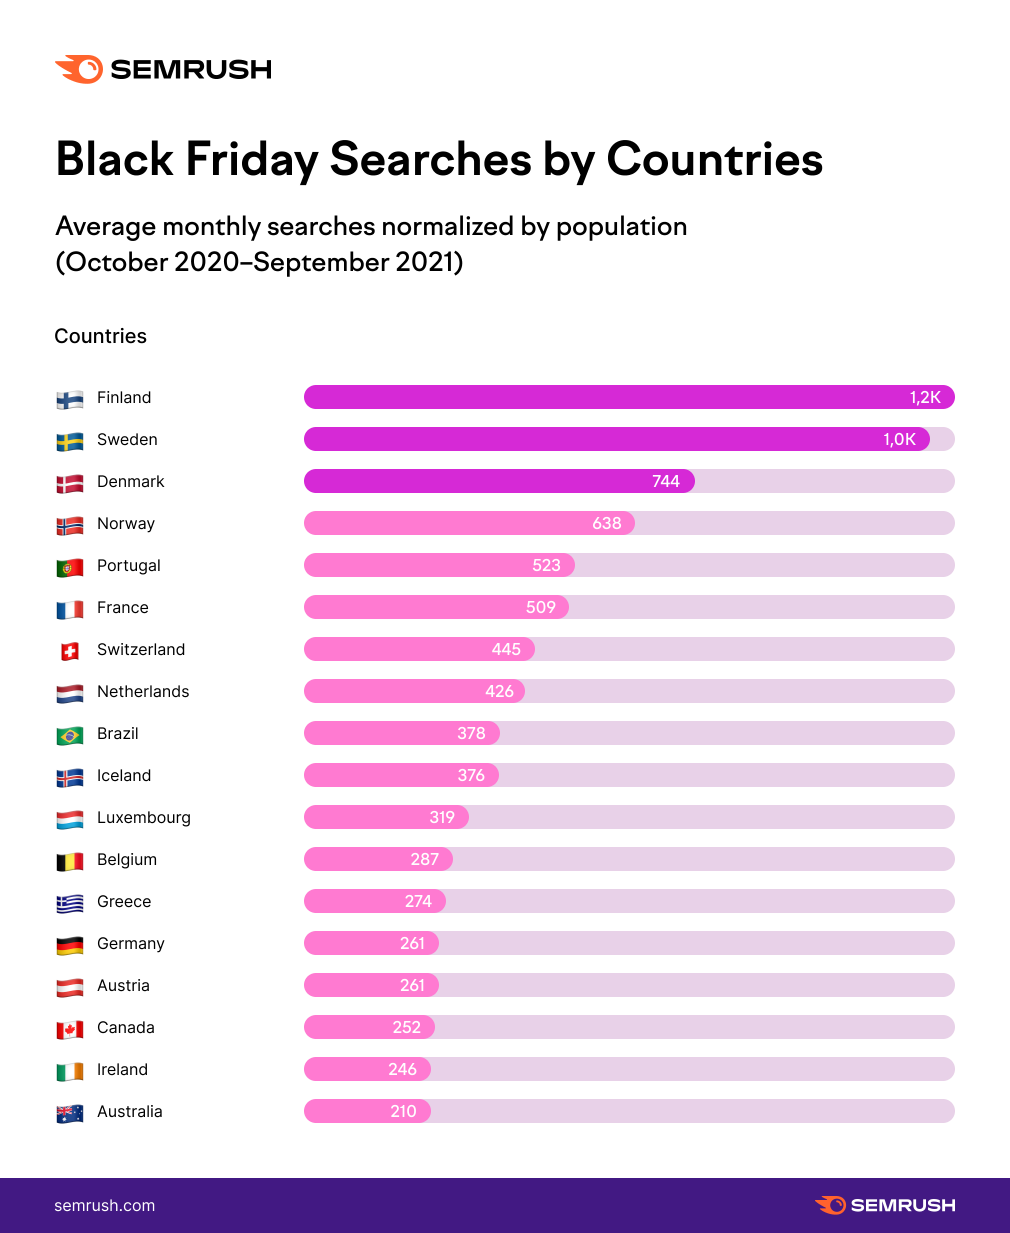 Chart - Black Friday Searches by Countries (Normalized by Population)